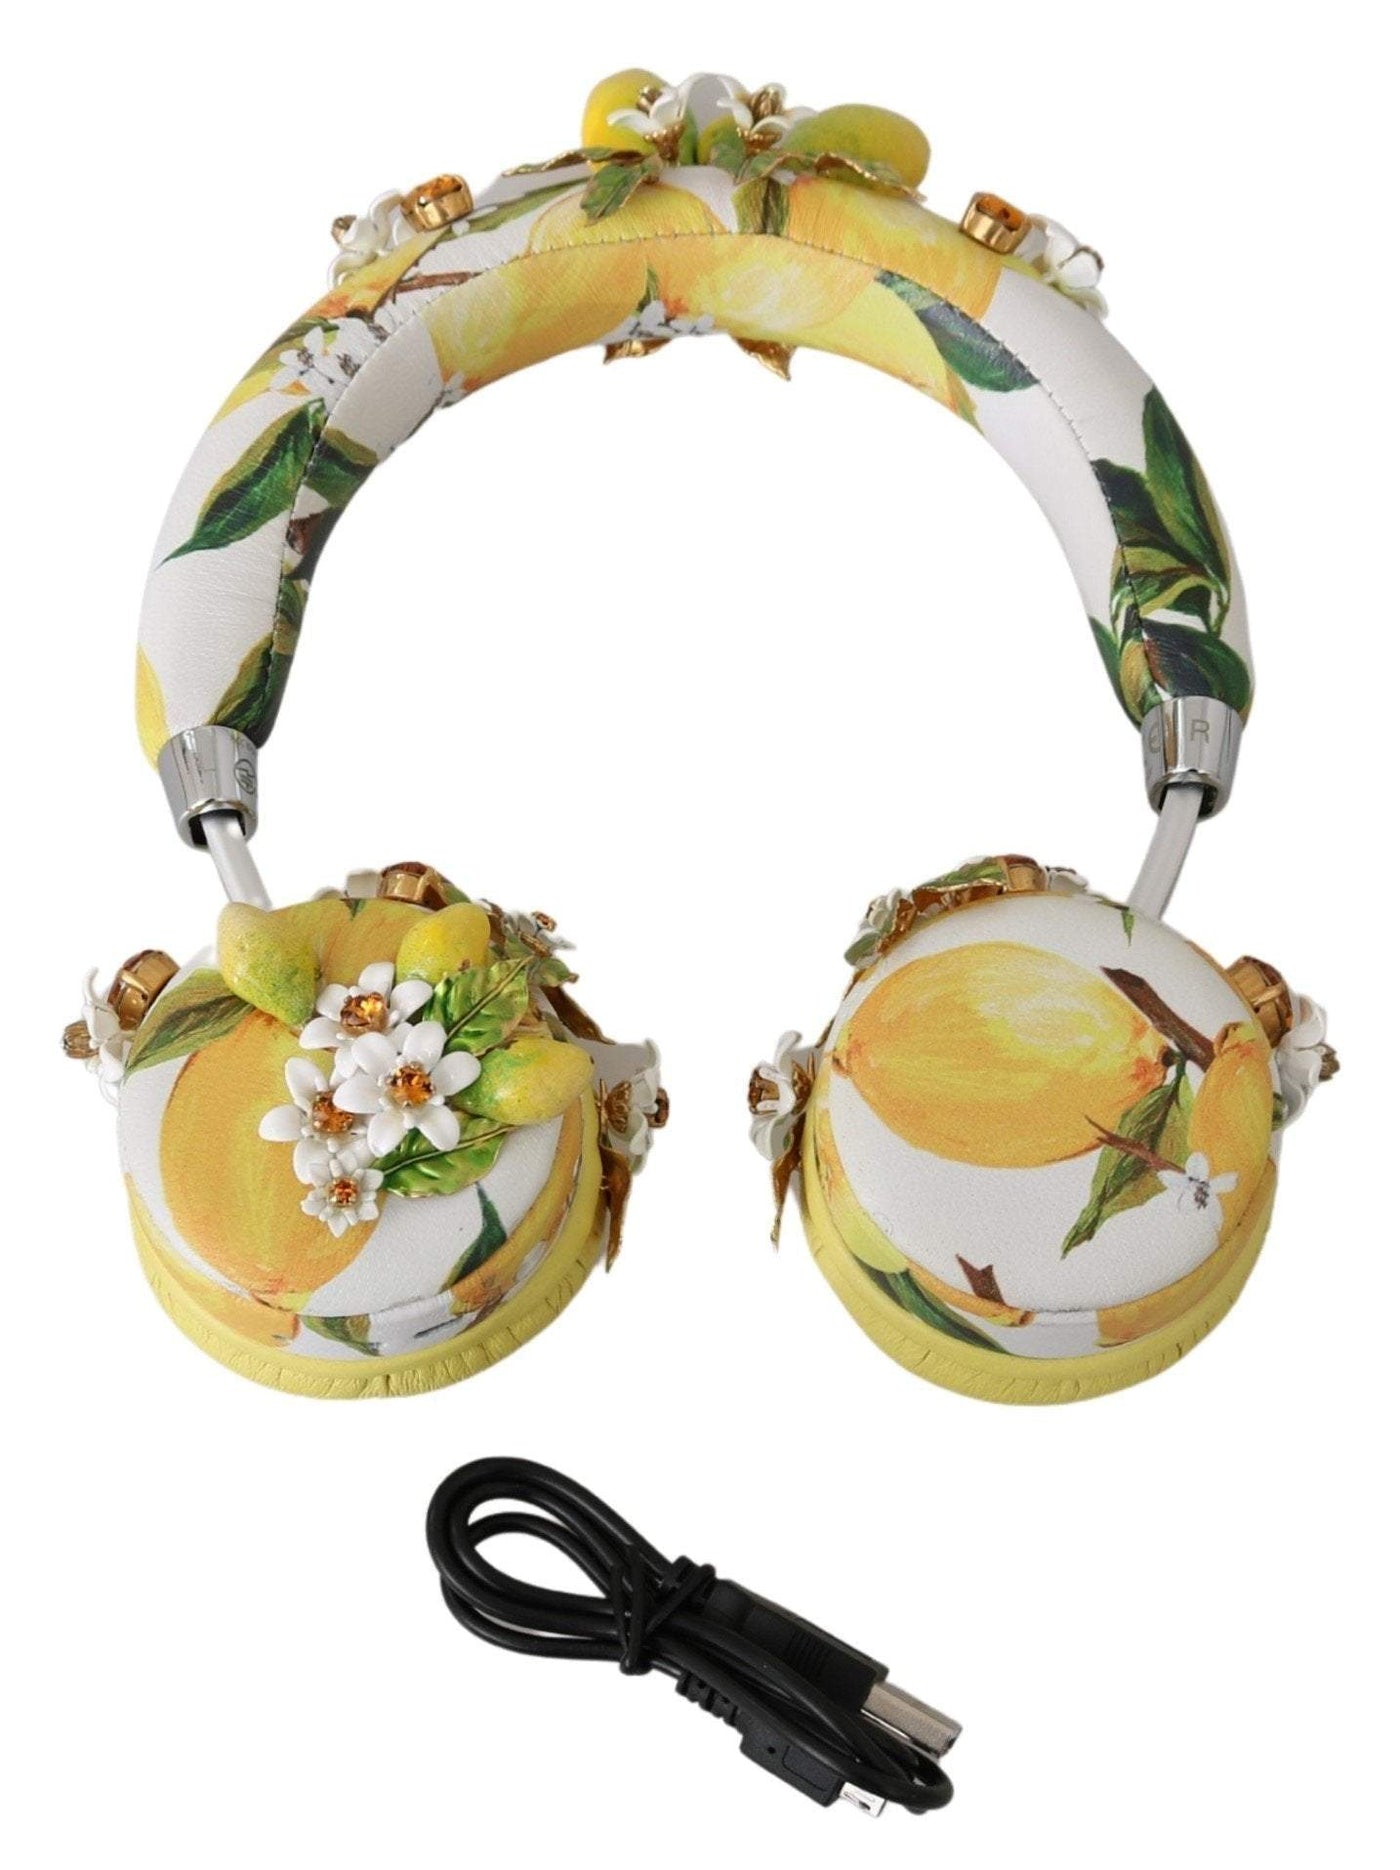 Dolce & Gabbana  Yellow Lemon Crystal Floral Headset Headphones #women, Accessories - New Arrivals, Brand_Dolce & Gabbana, Catch, Dolce & Gabbana, feed-agegroup-adult, feed-color-yellow, feed-gender-female, feed-size-OS, Gender_Women, Kogan, Other - Women - Accessories, Yellow at SEYMAYKA